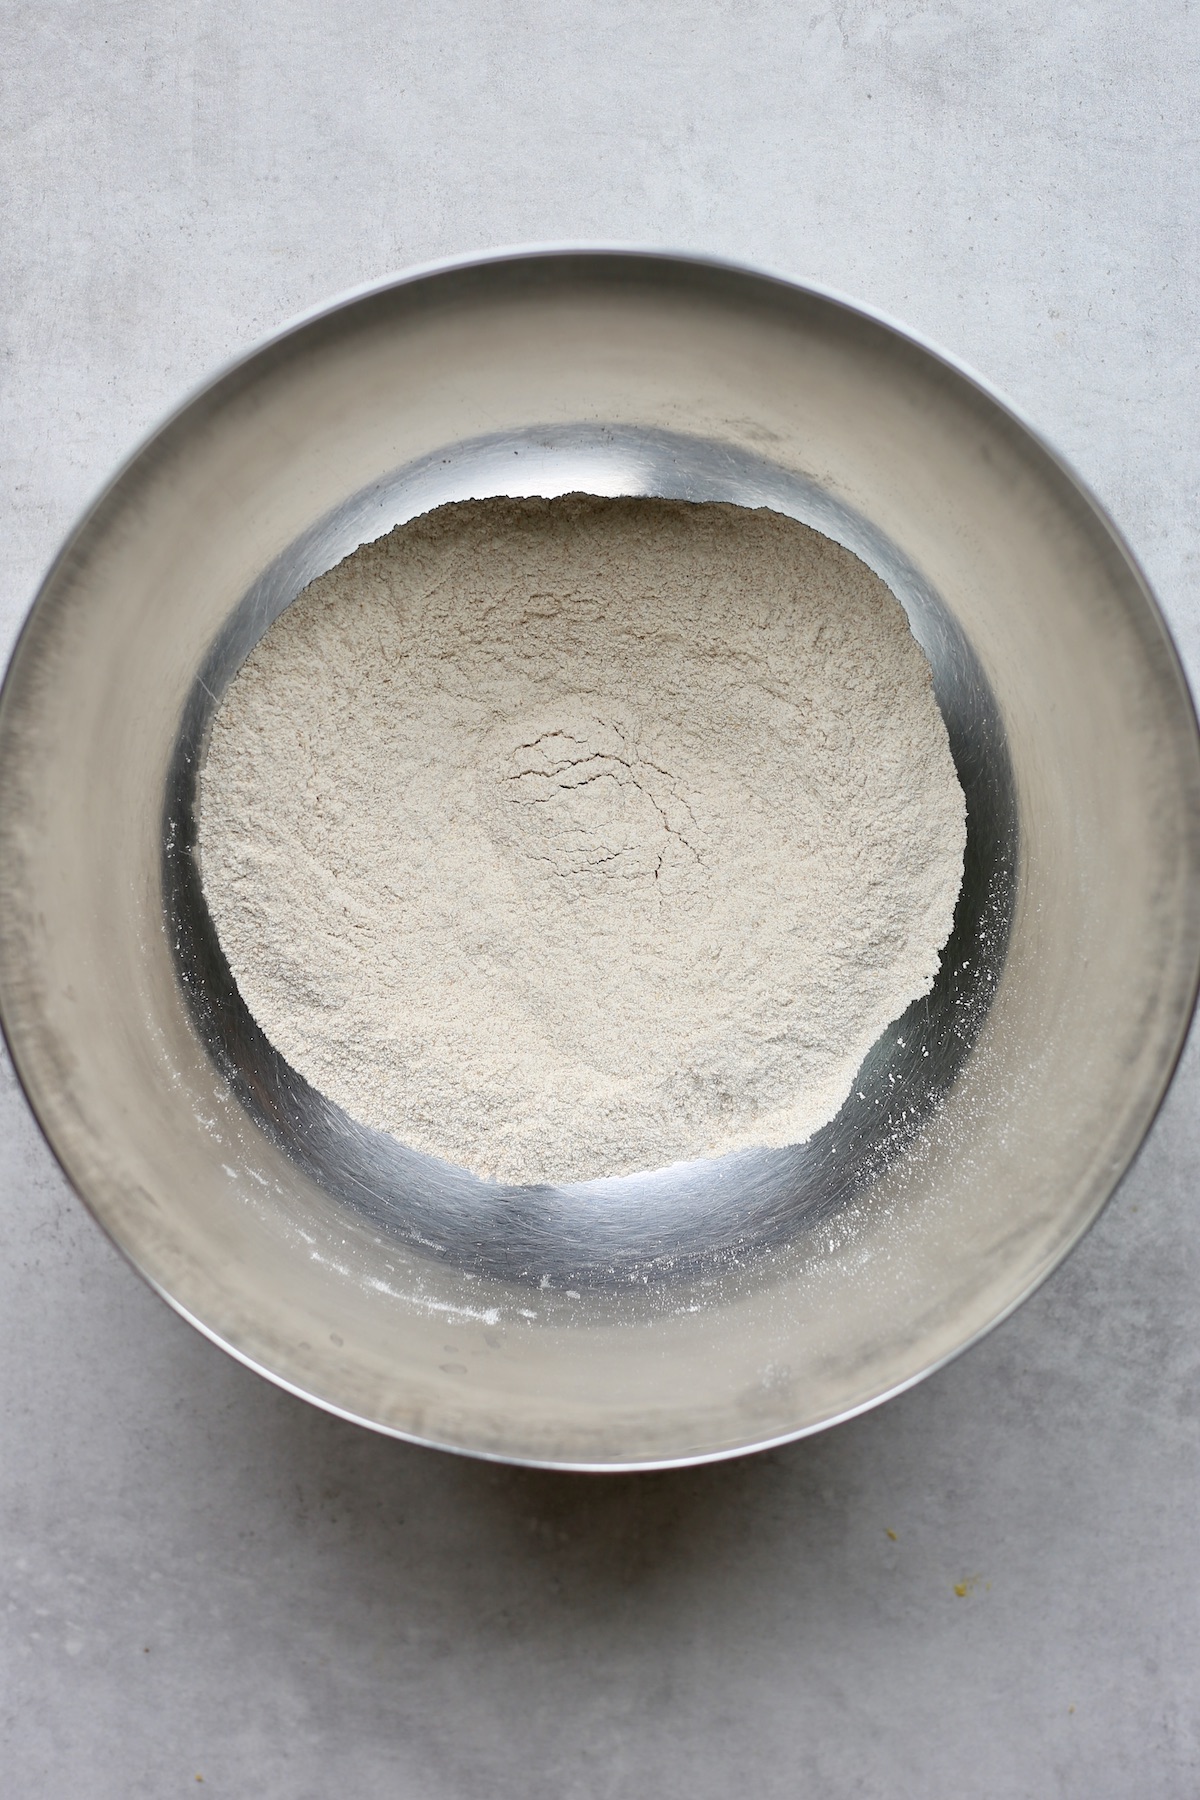 Whole wheat flour, salt, baking powder and baking soda combined in a large silver mixing bowl.